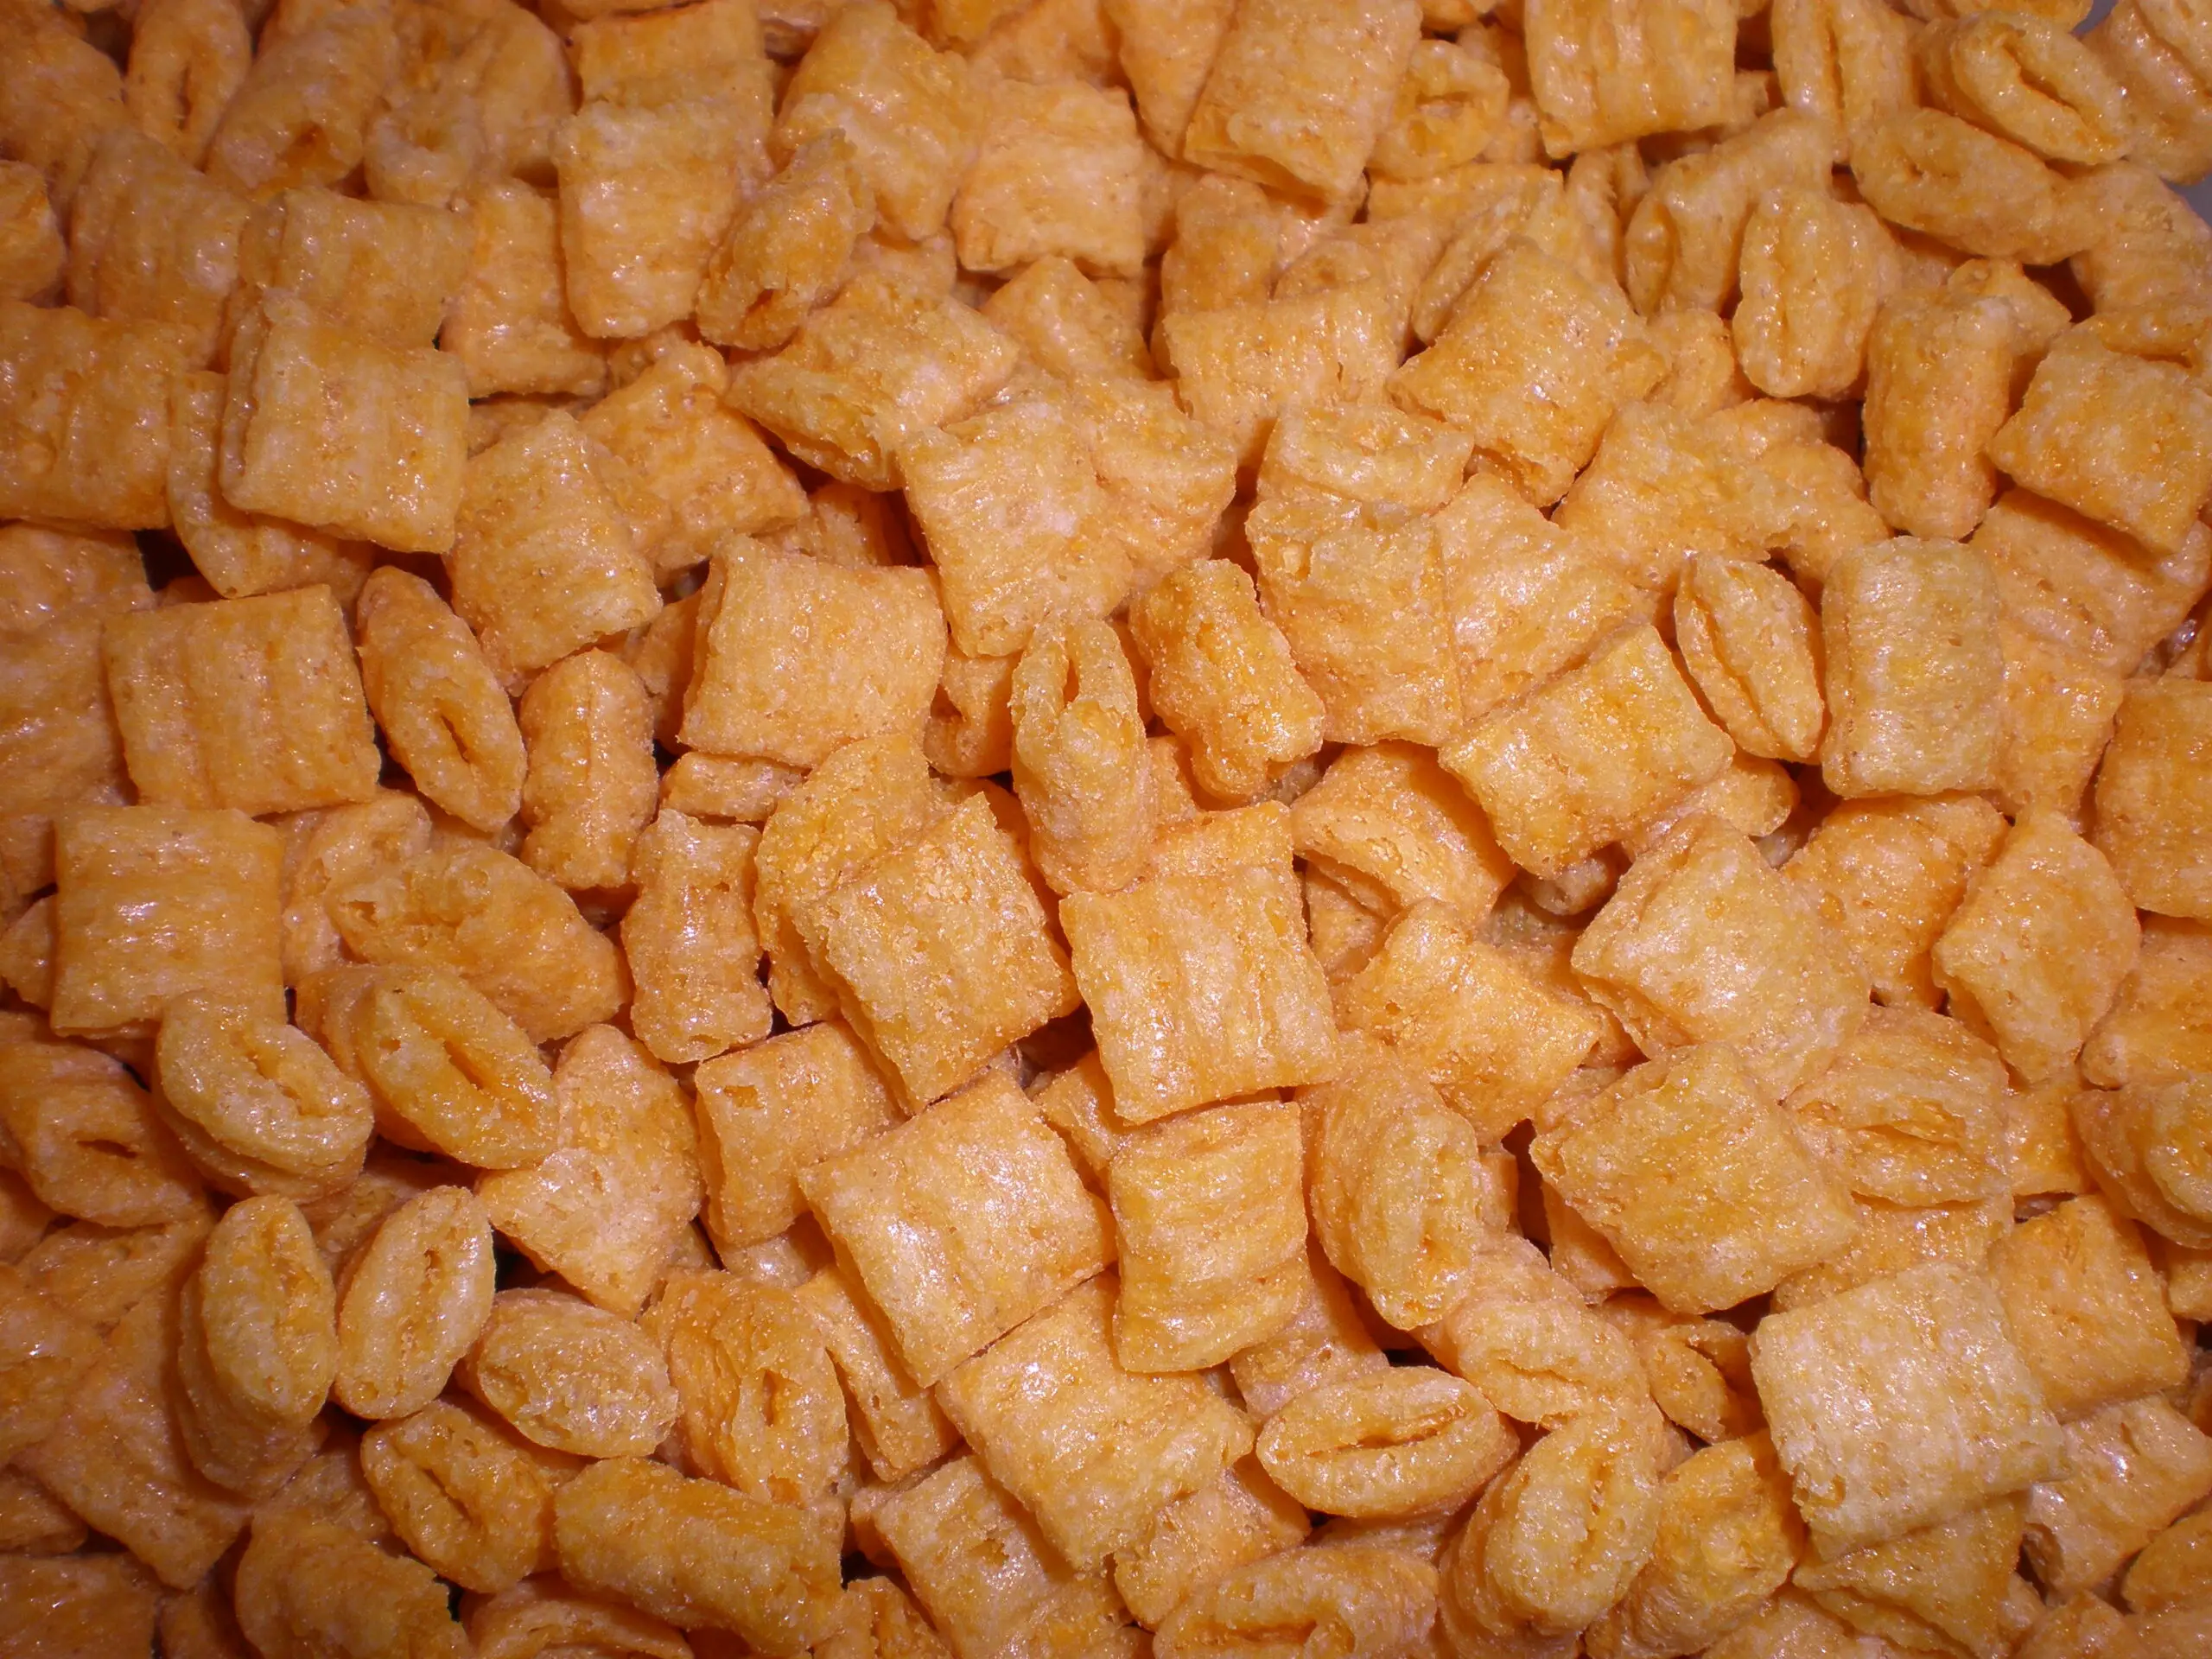 Cap'n Crunch has a big problem with its ingredients according to the Environmental Working Group (EWG). 